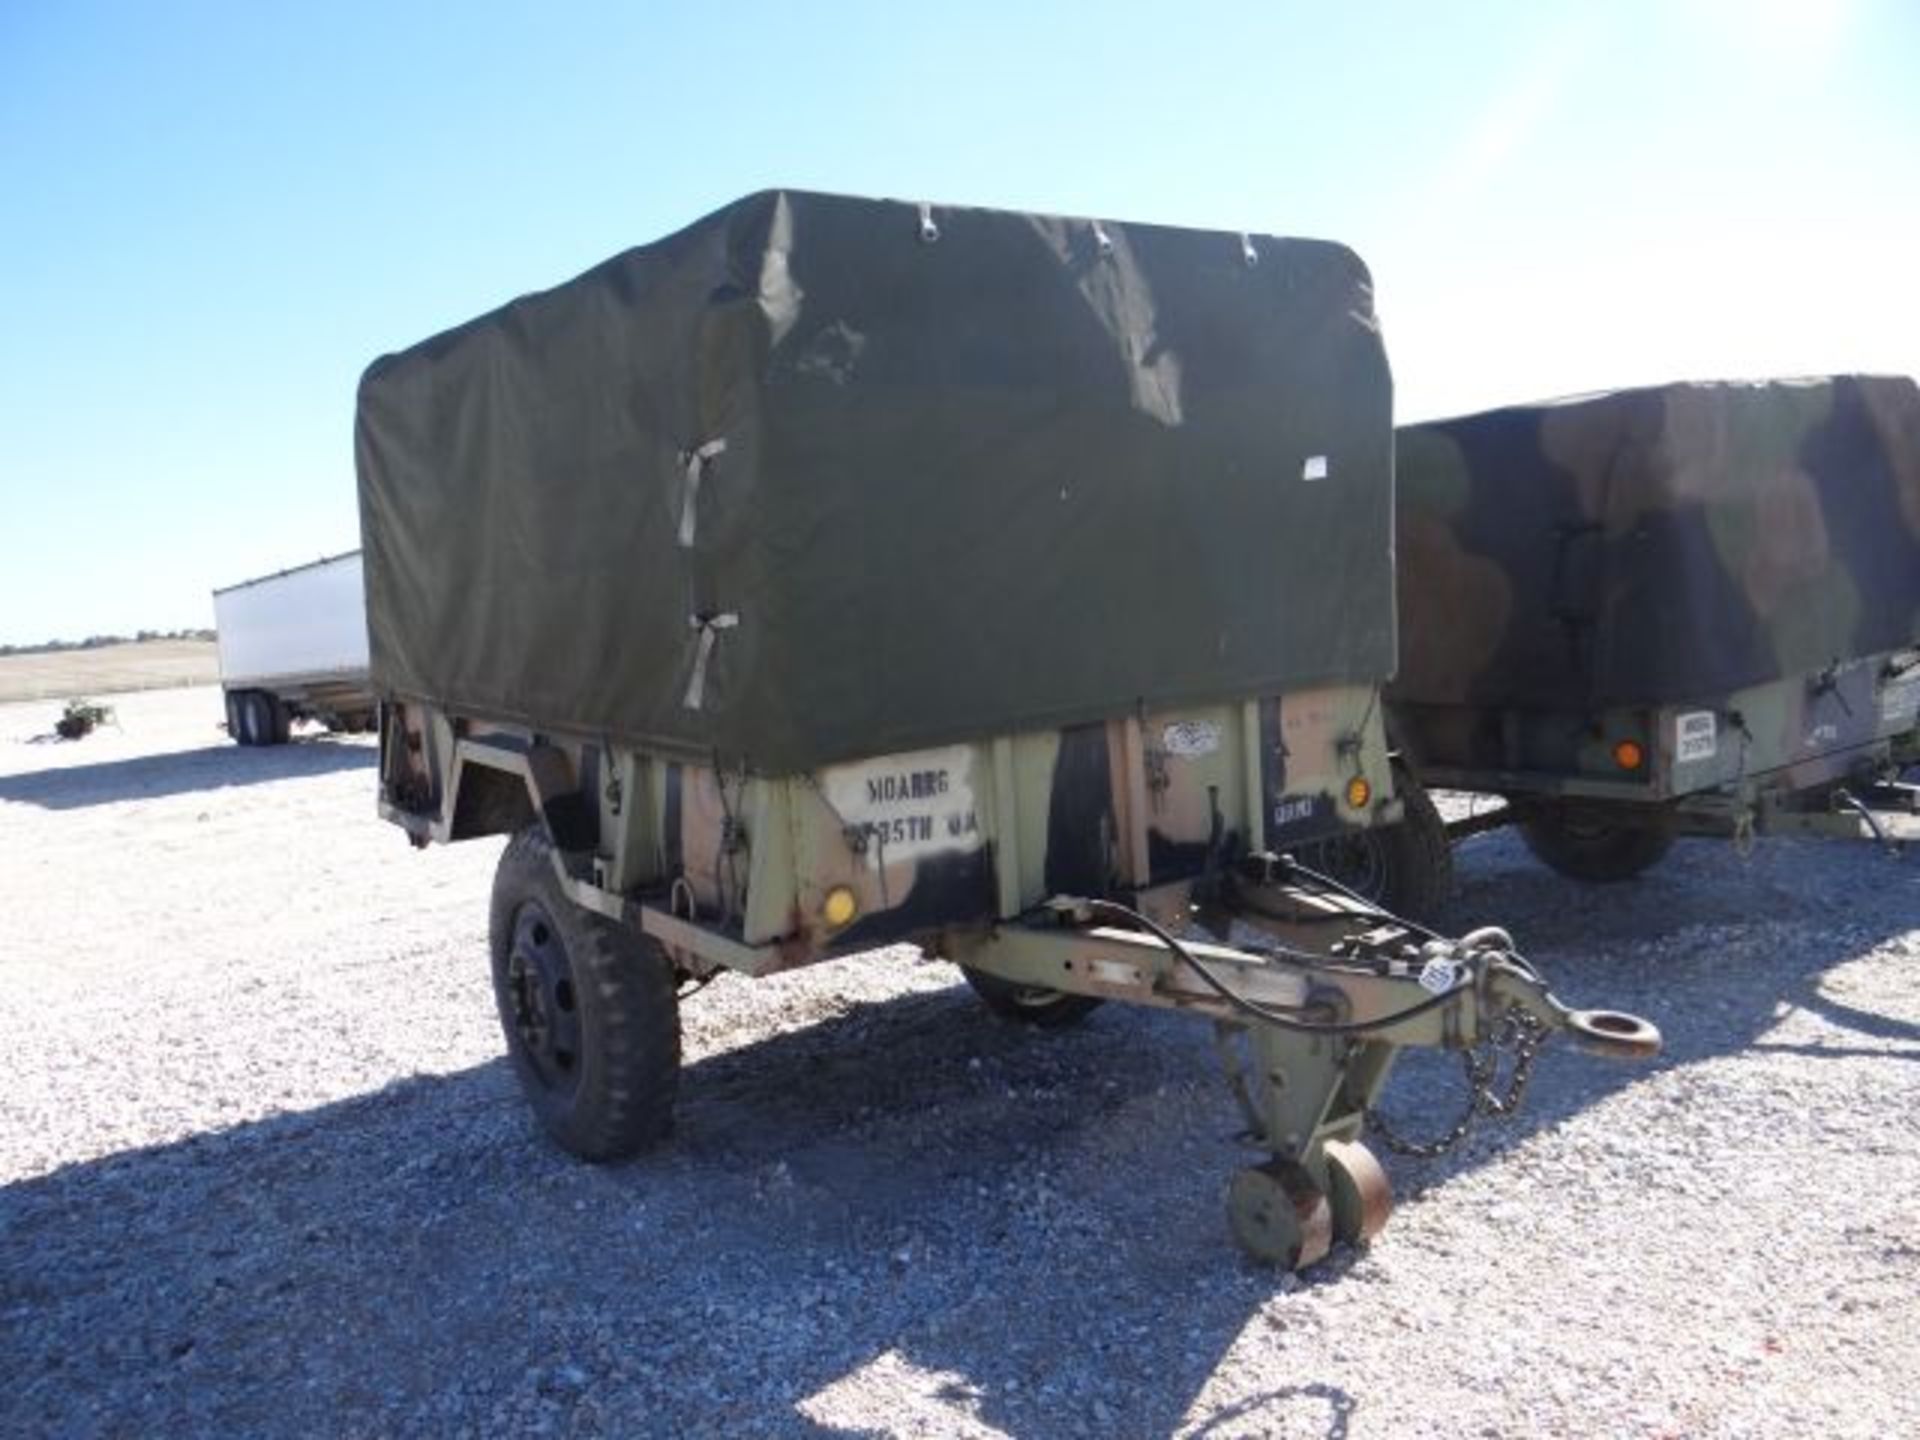 1968 Military Trailer 1 1/2 Ton, Pintle Hitch, Cargo Tarp, Title in the Office - Image 2 of 3